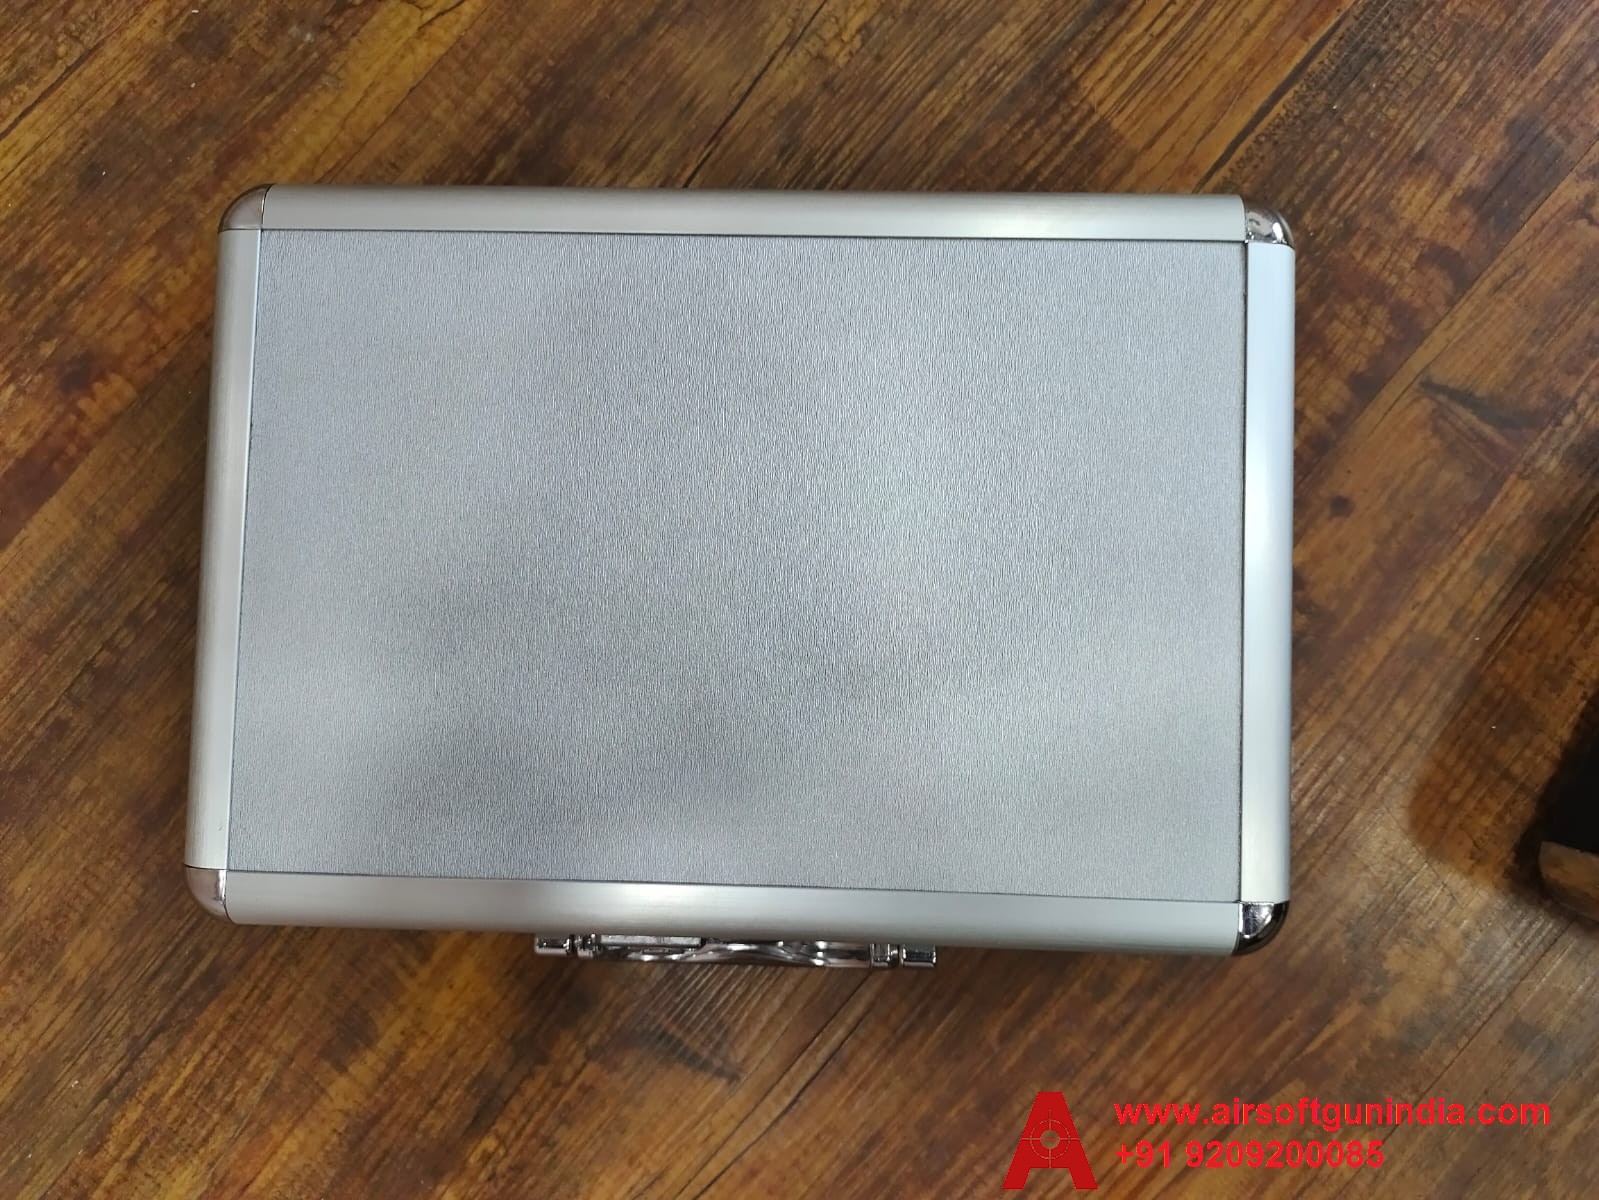 Premium Aluminum Case / Box Silver With Safety Lock By Airsoft Gun India